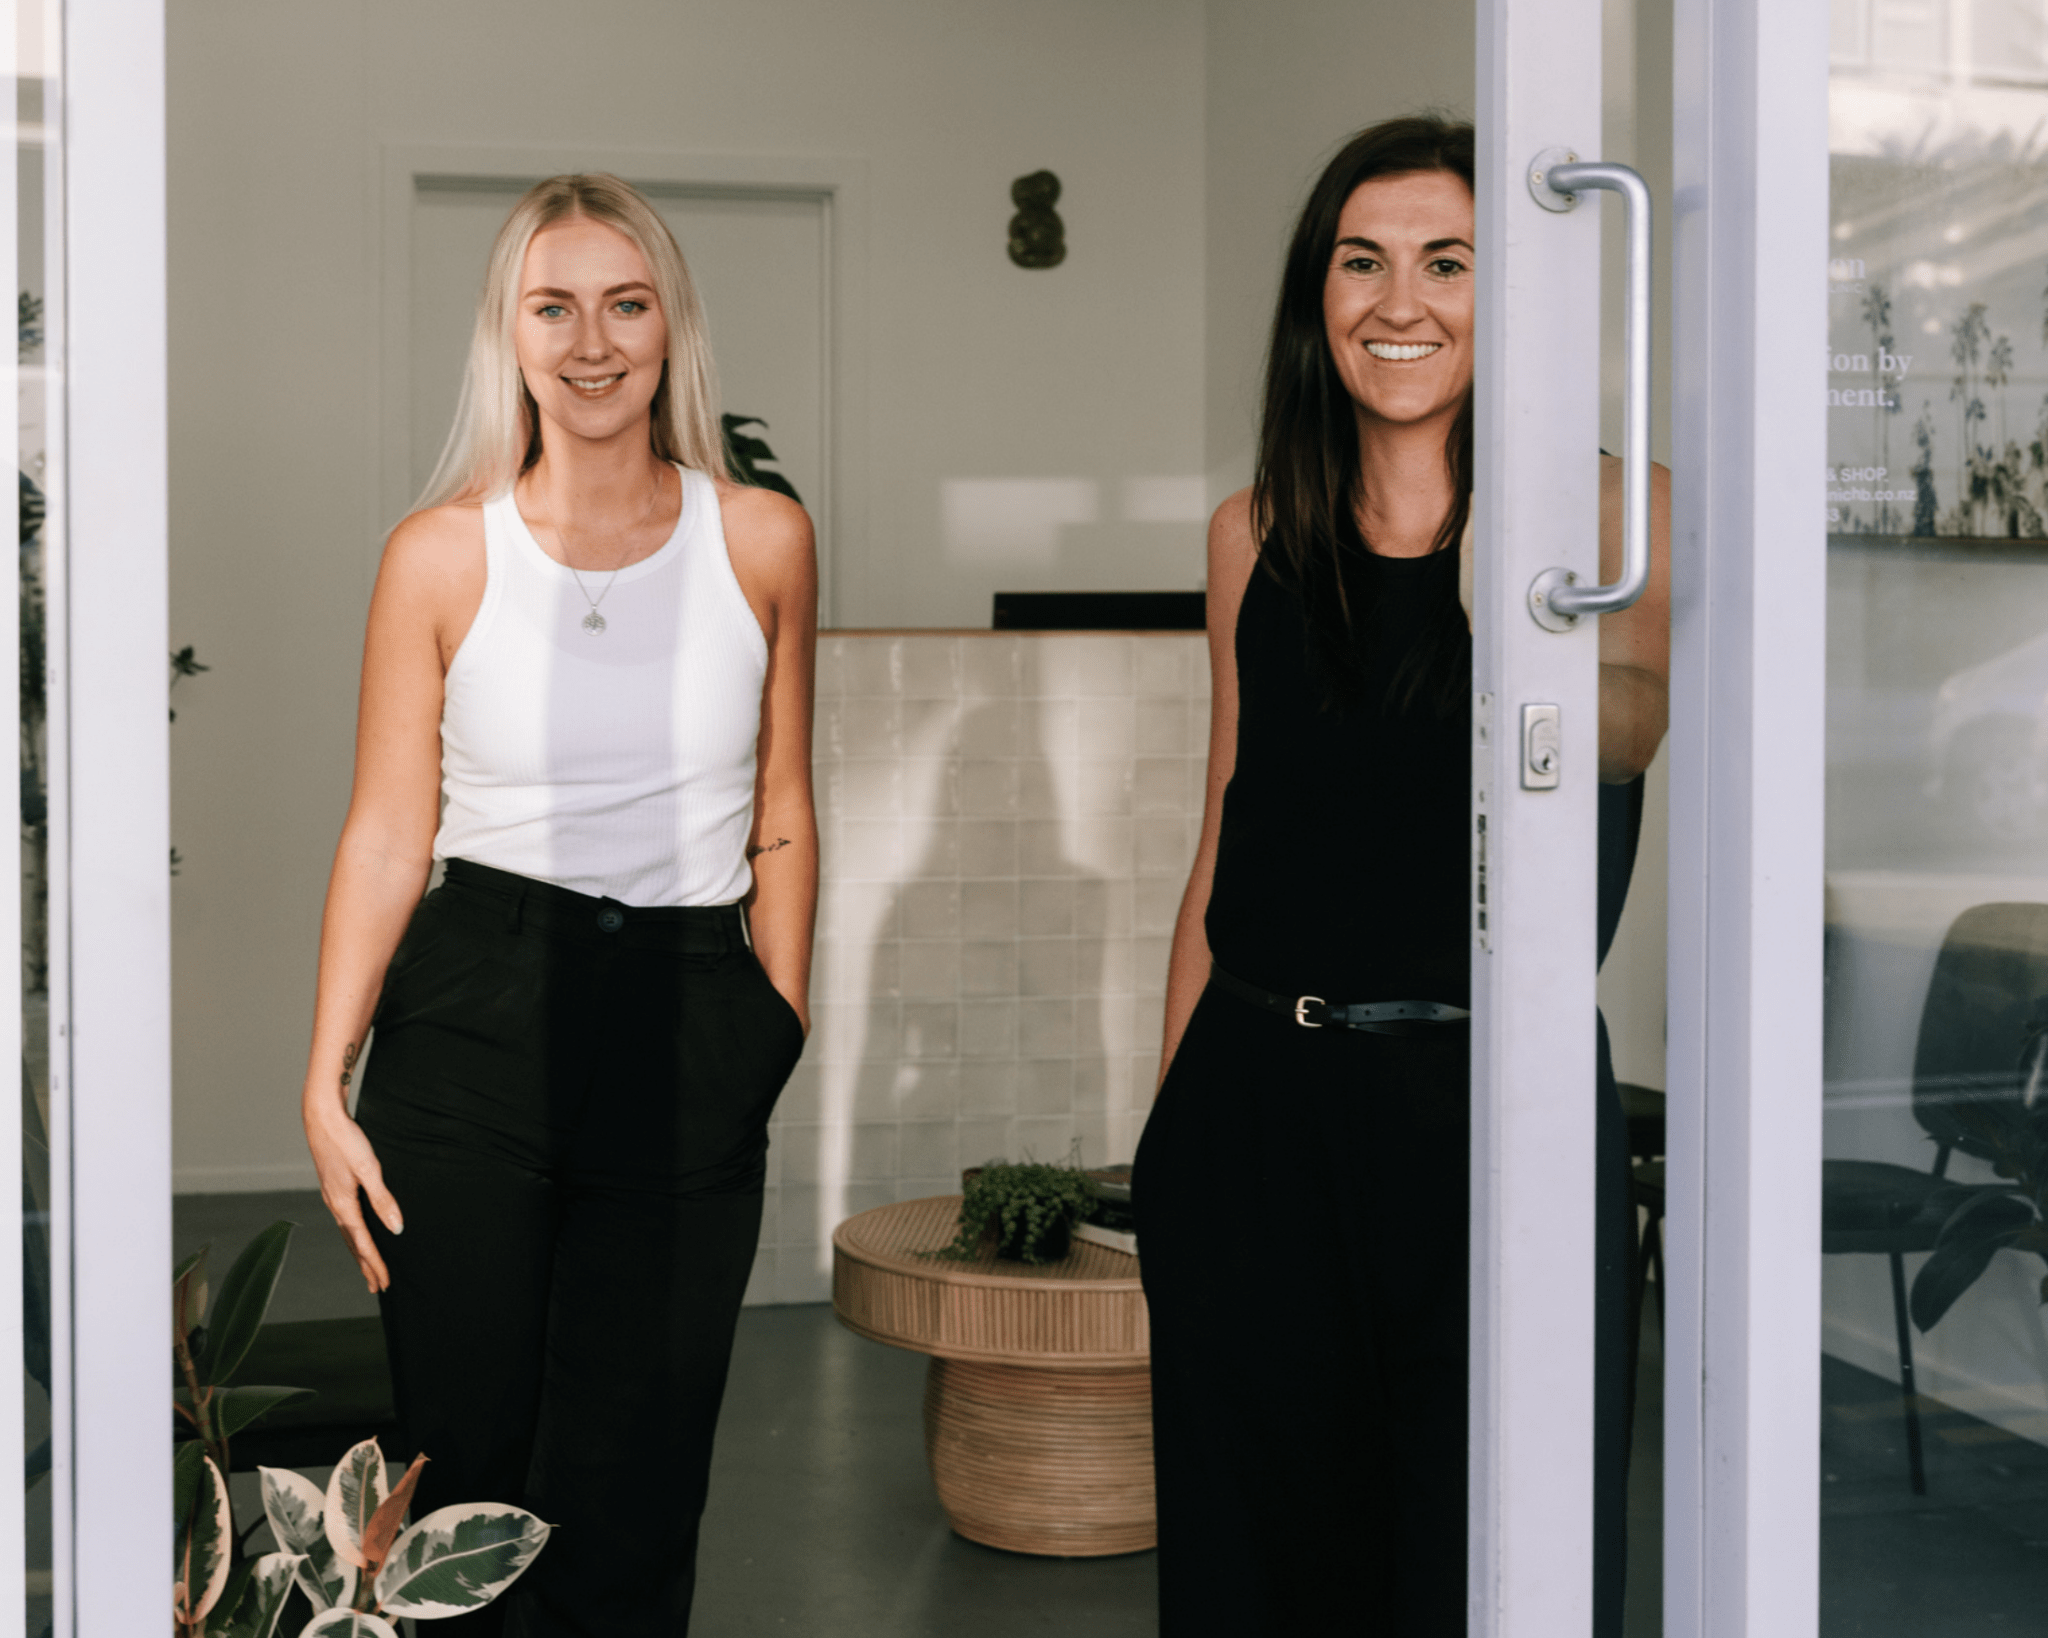 Day in the Life & On the Plate with Clinical Nutritionists Gina & Emma